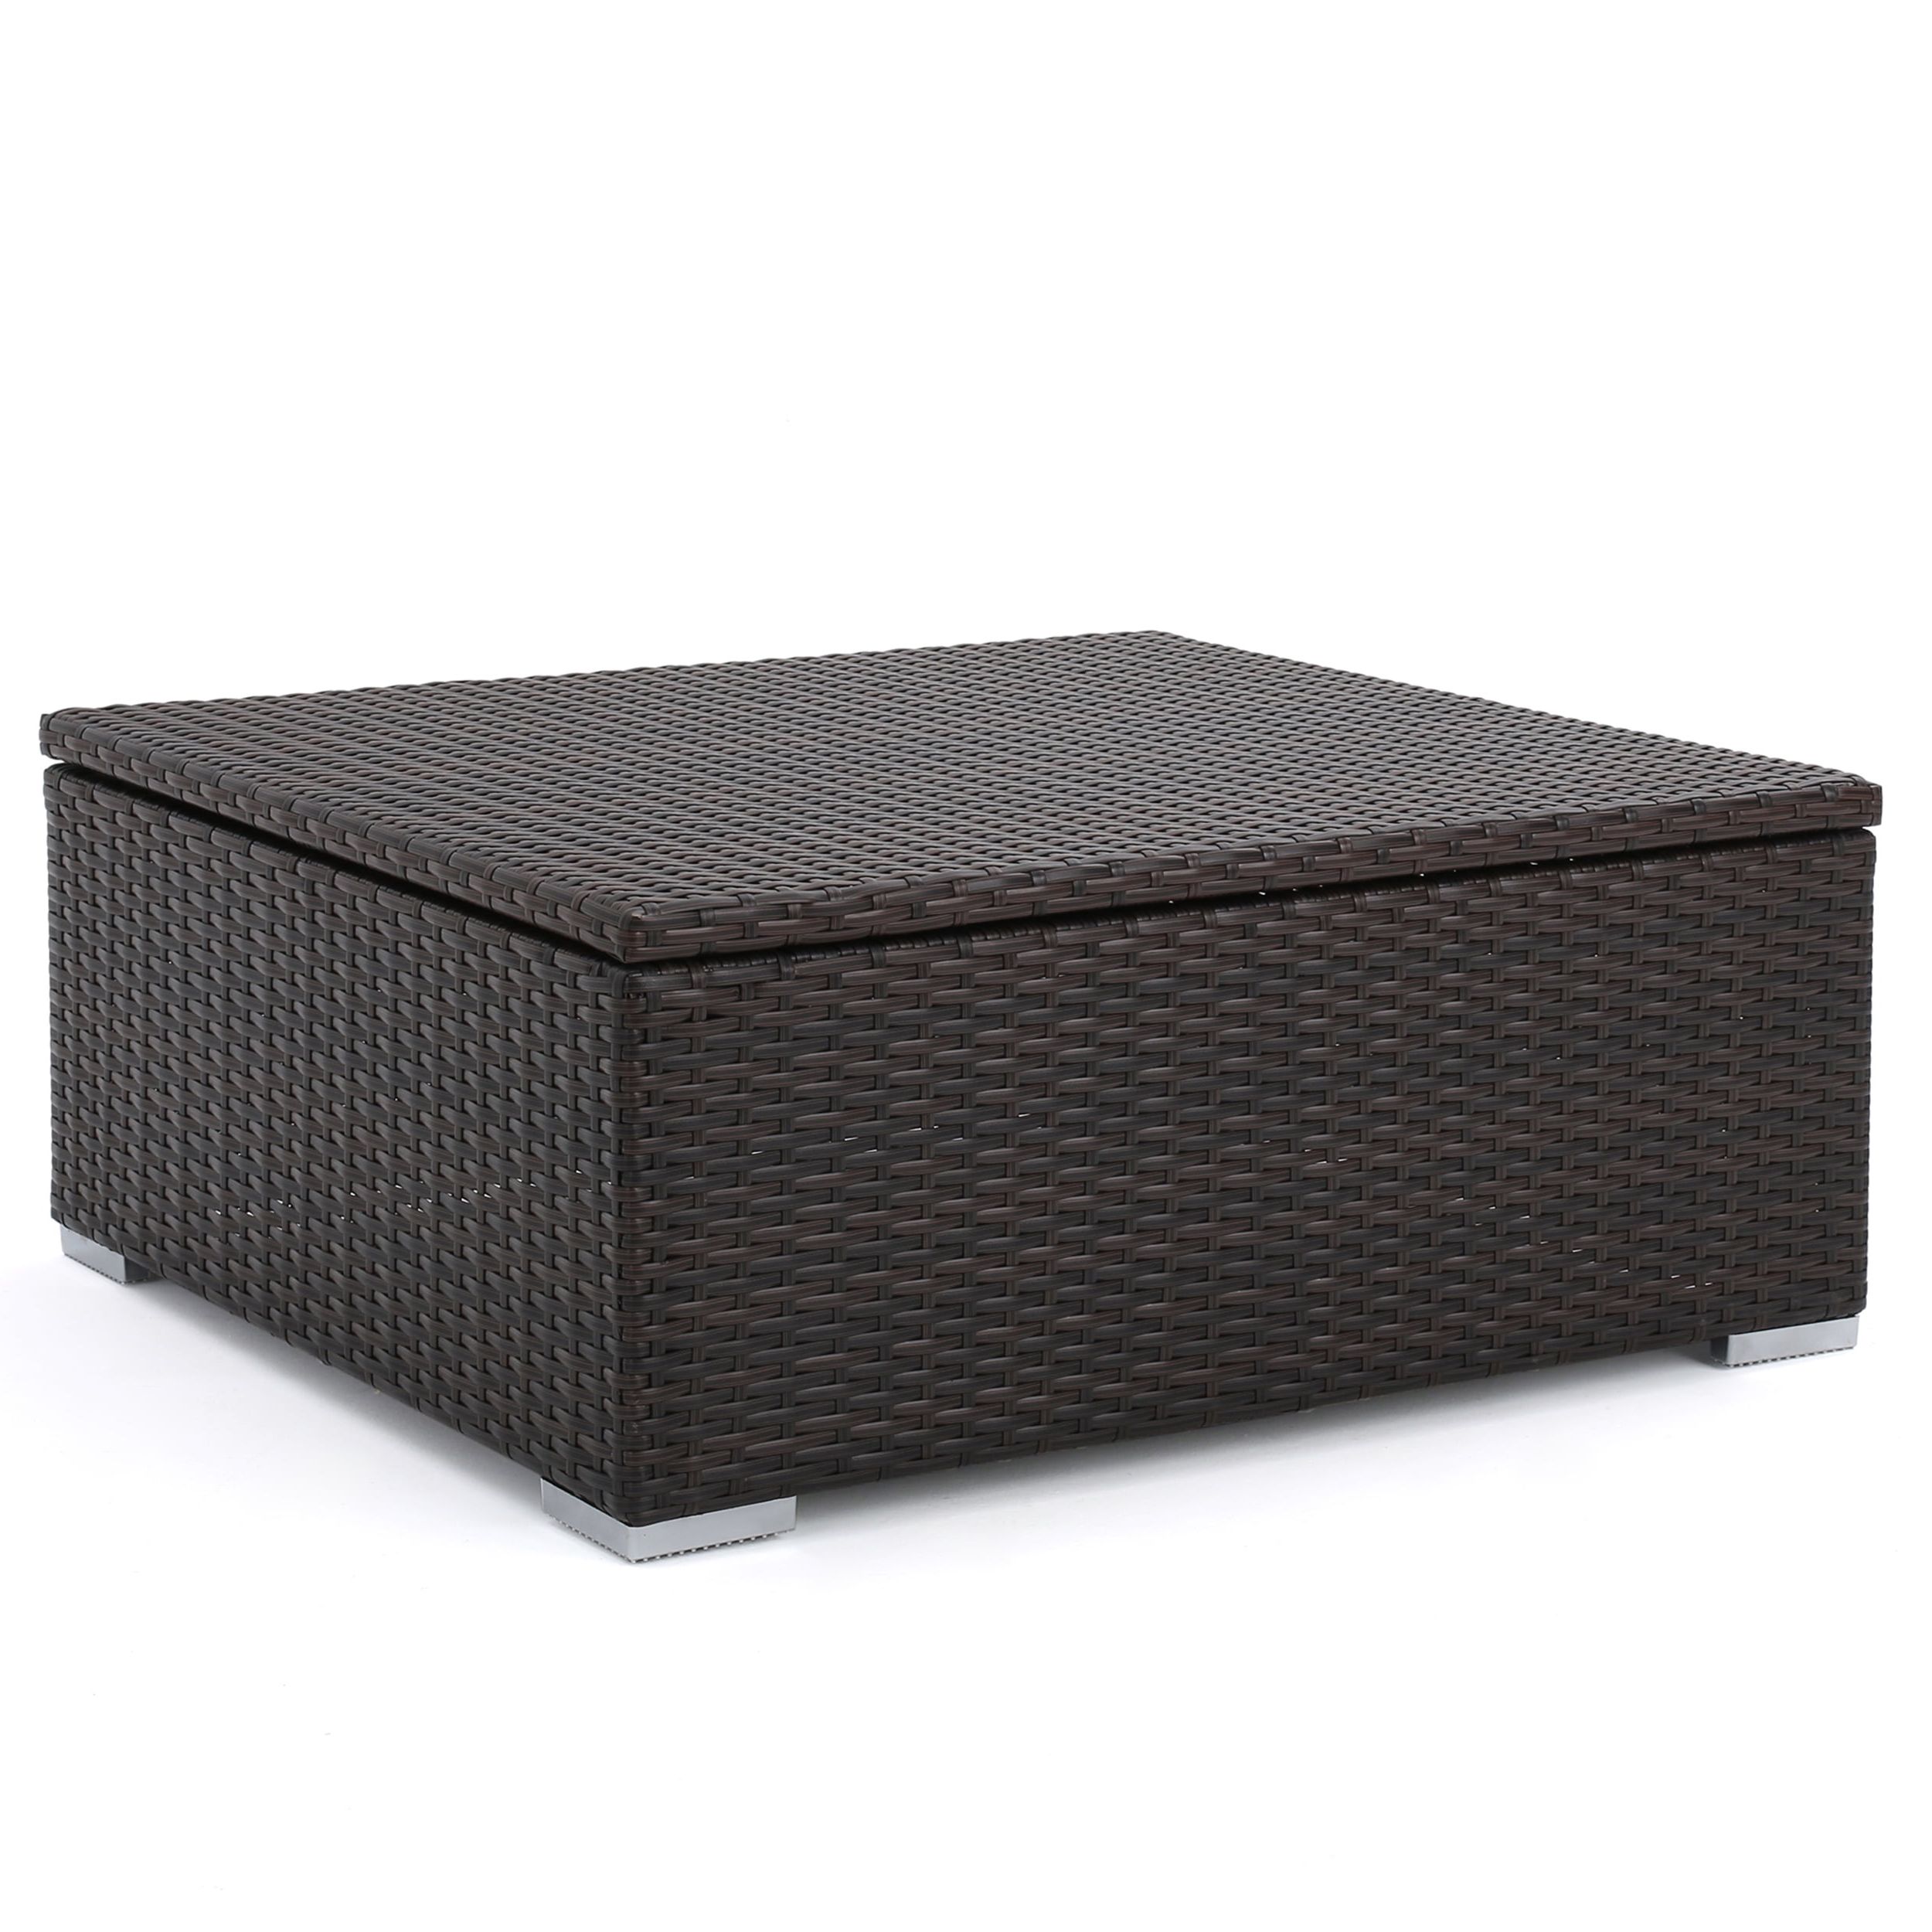 Costa Mesa Outdoor Wicker Coffee Table With Storage, Multibrown With Waterproof Coffee Tables (View 5 of 20)